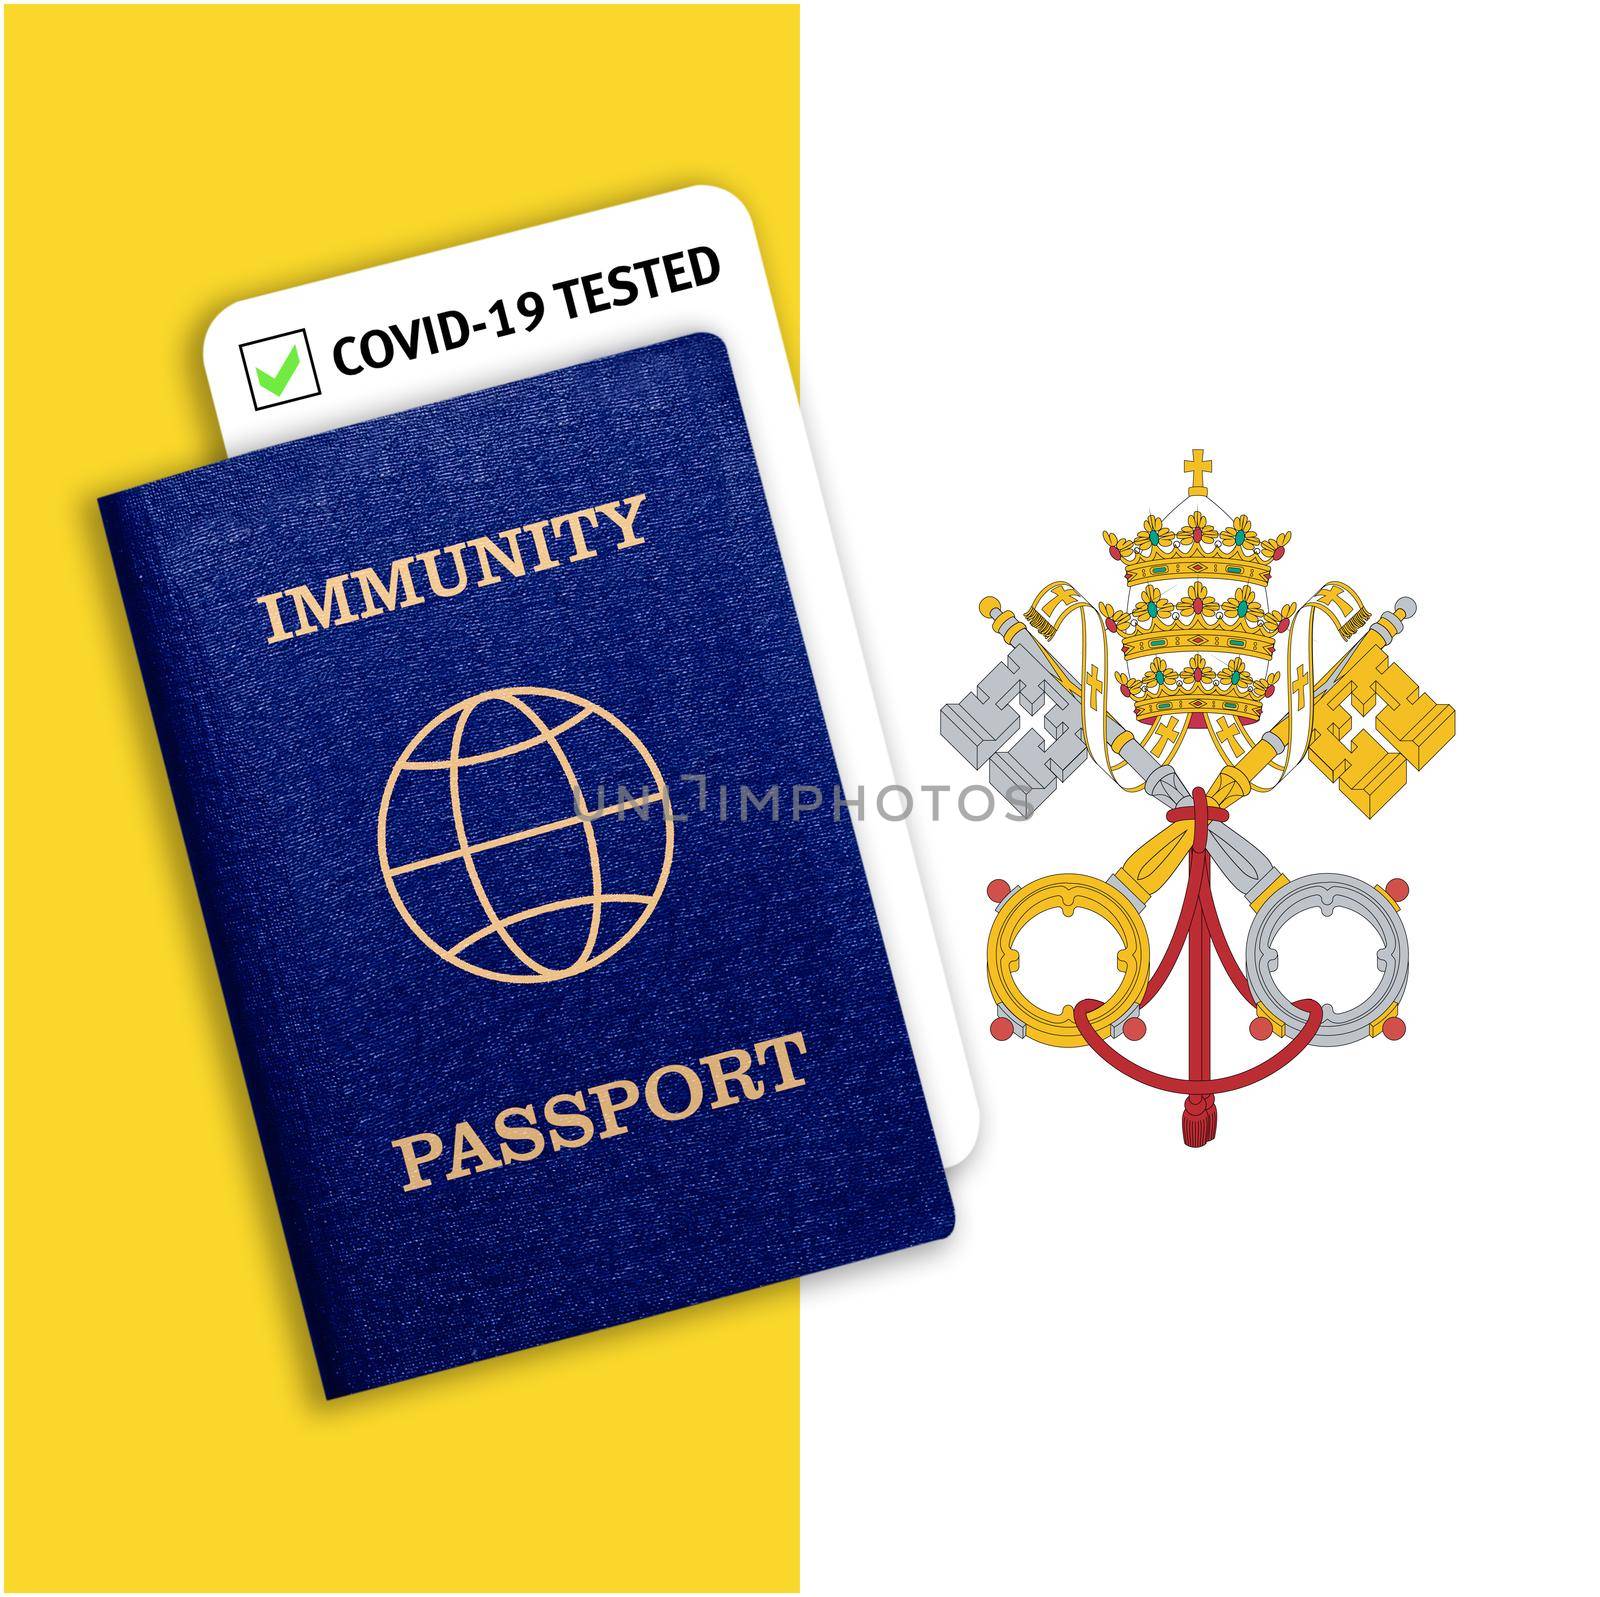 Concept of Immunity passport, certificate for traveling after pandemic for people who have had coronavirus or made vaccine and test result for COVID-19 on flag of Vatican